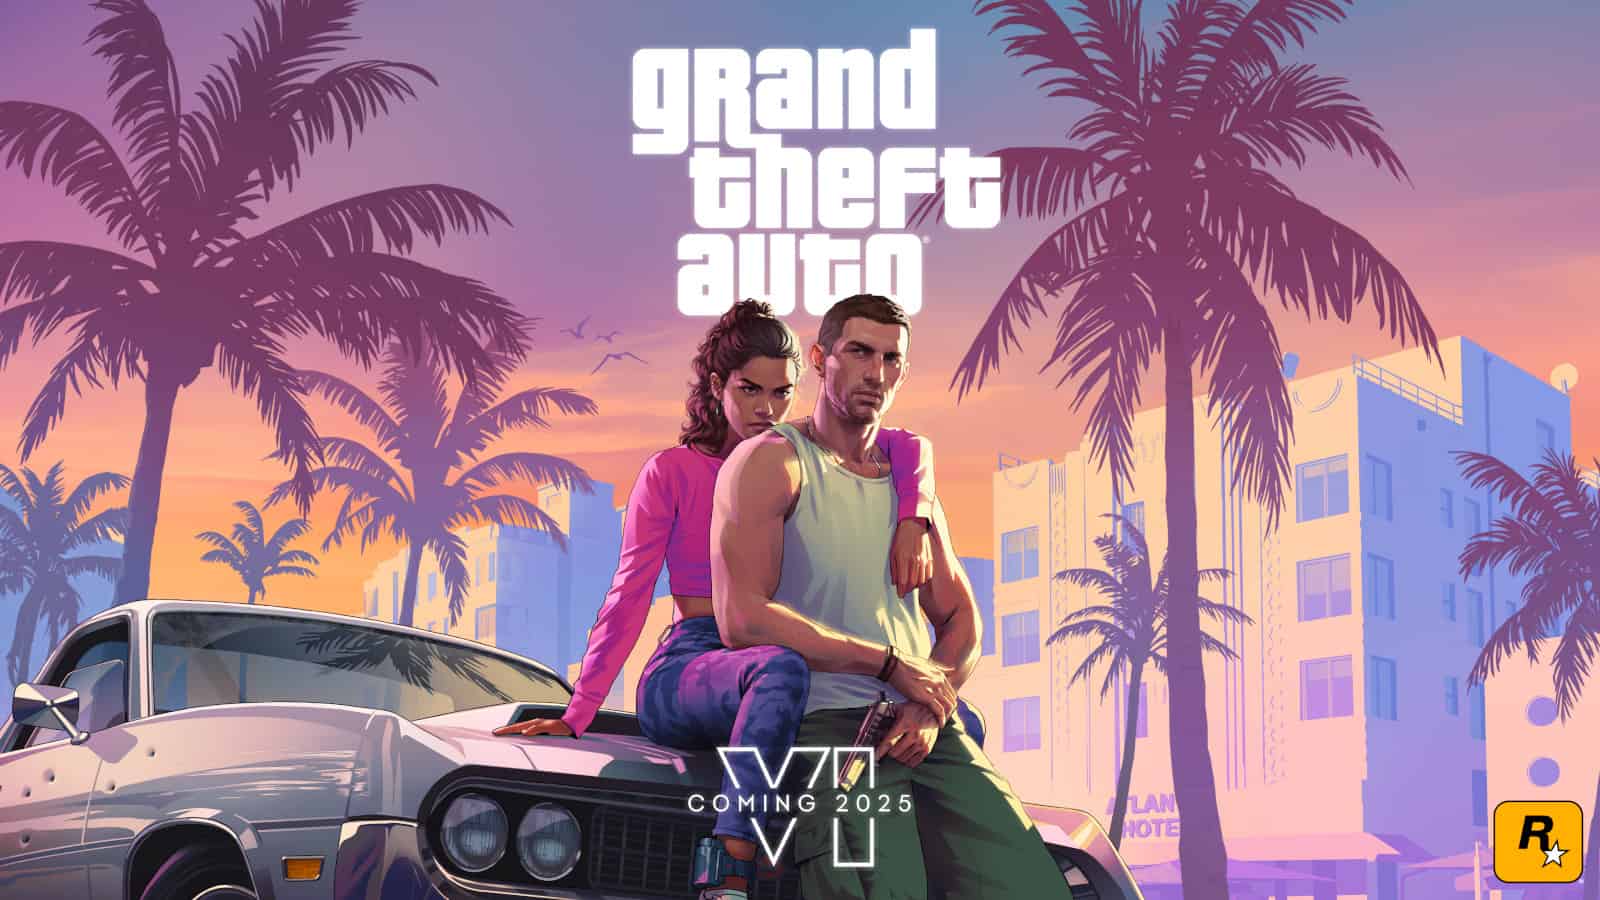 Grand Theft Auto VI's release date is scheduled for Fall 2025